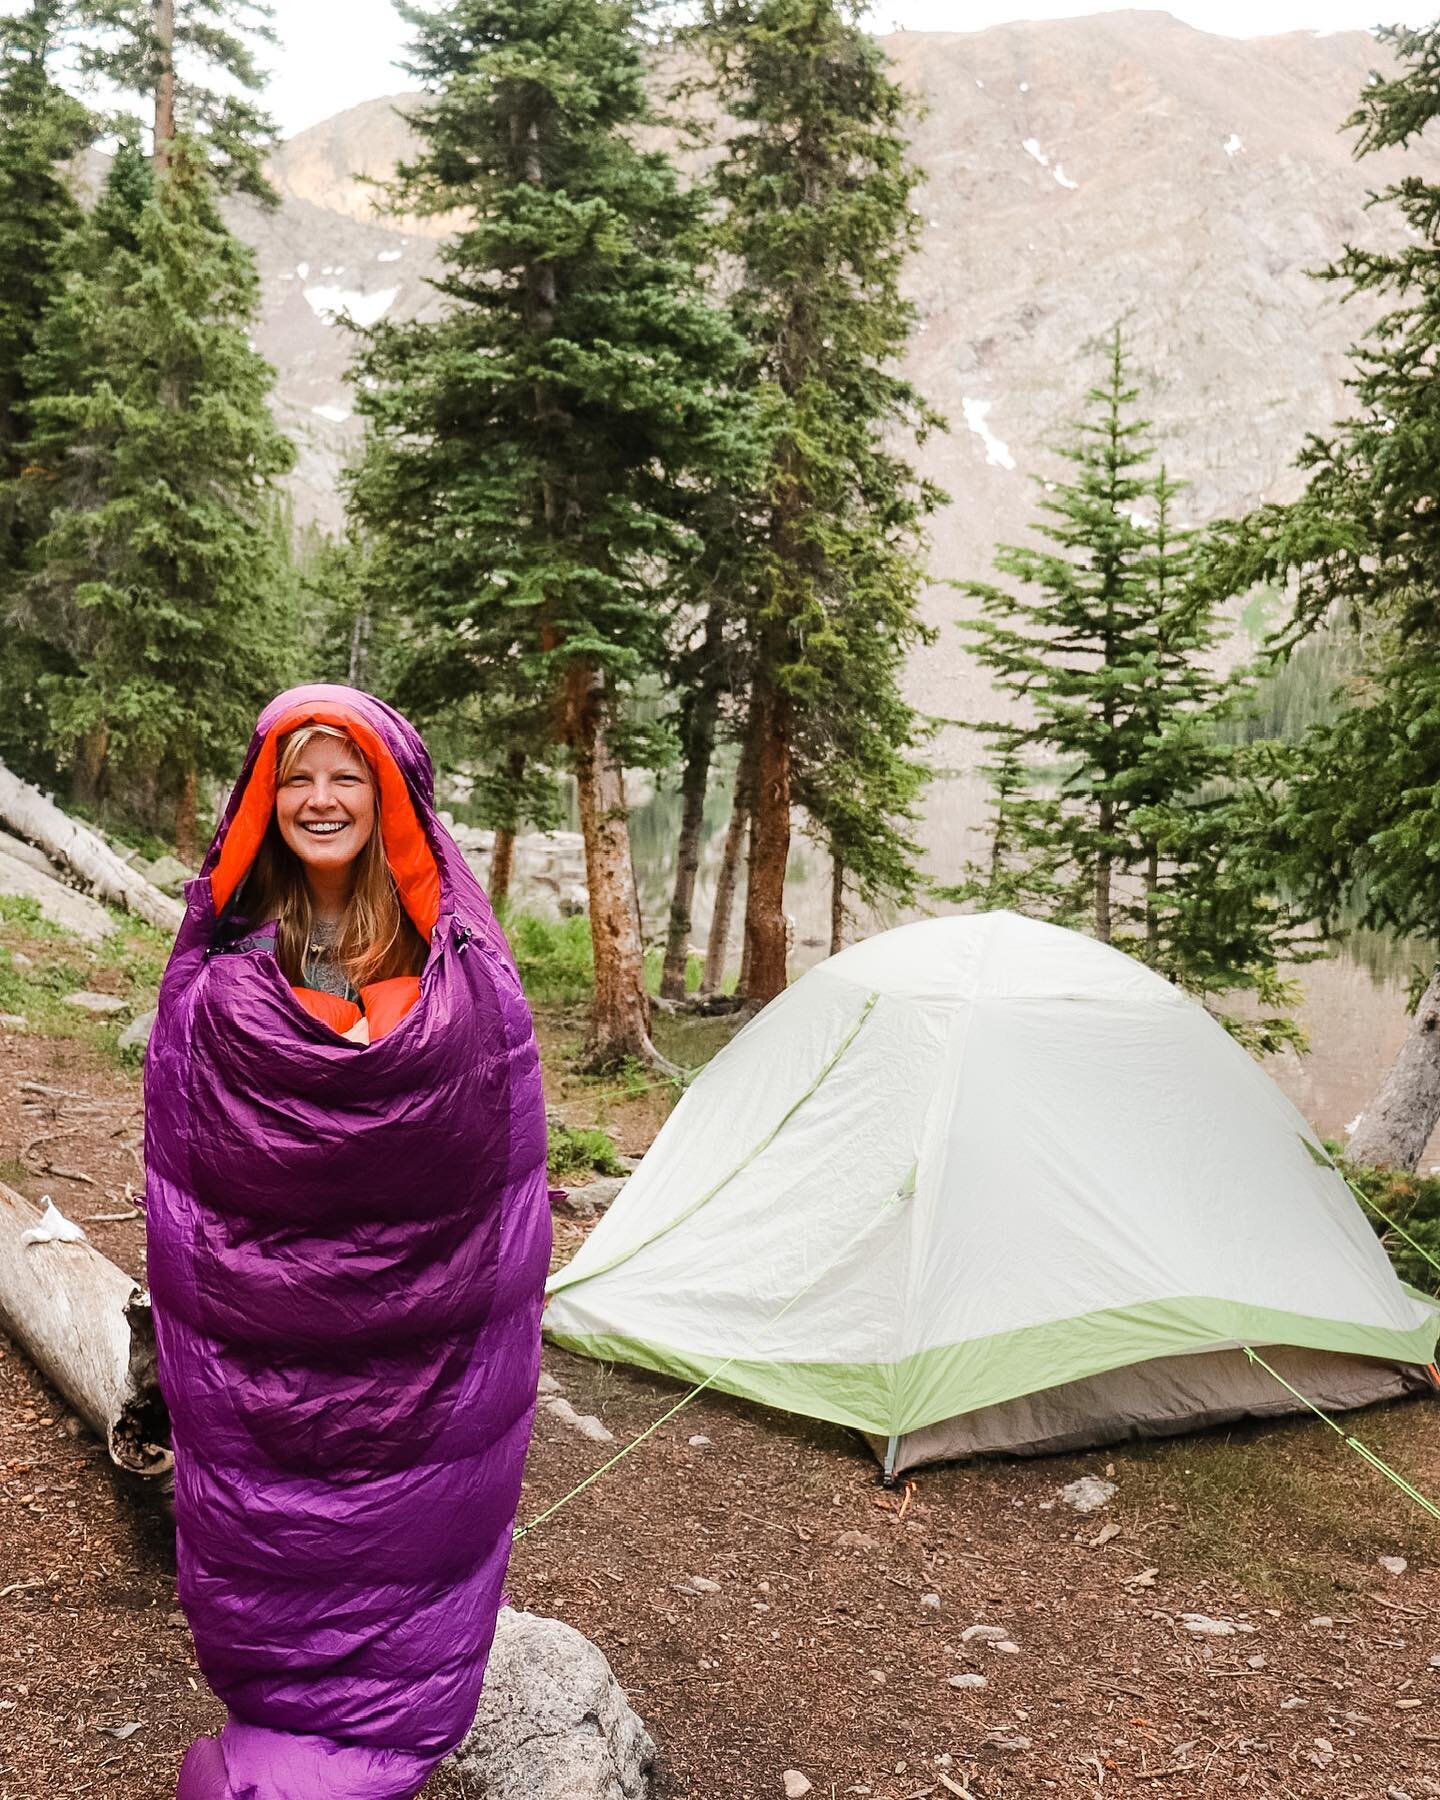 ⛺️Renting Backpacking Gear: Part One ⛺️

I don&rsquo;t have any backpacking gear for my trip 🤷&zwj;♀️now what??

First, look local! Local backcountry shops may have rental gear options. Which makes for a good opportunity for you to go into the store